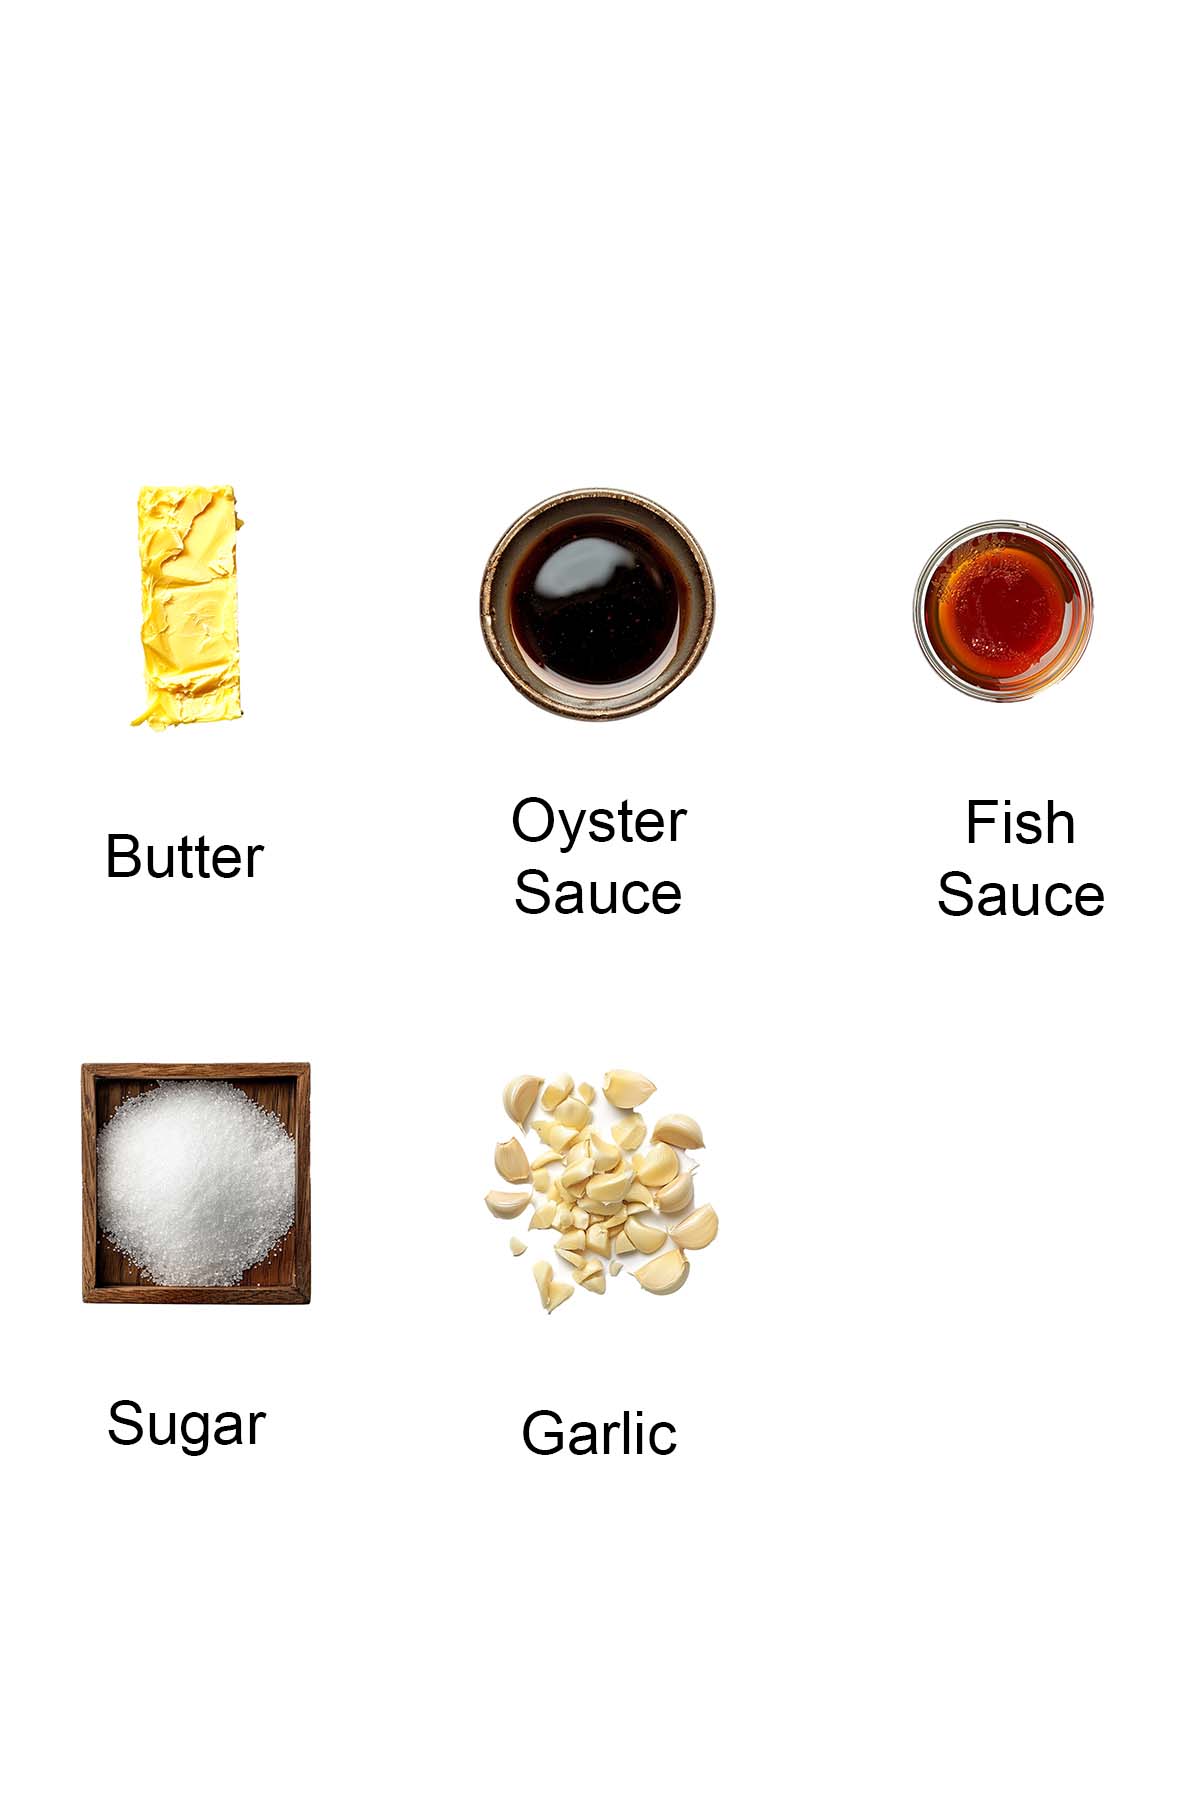 This image shows the ingredients used to make the garlic sauce.